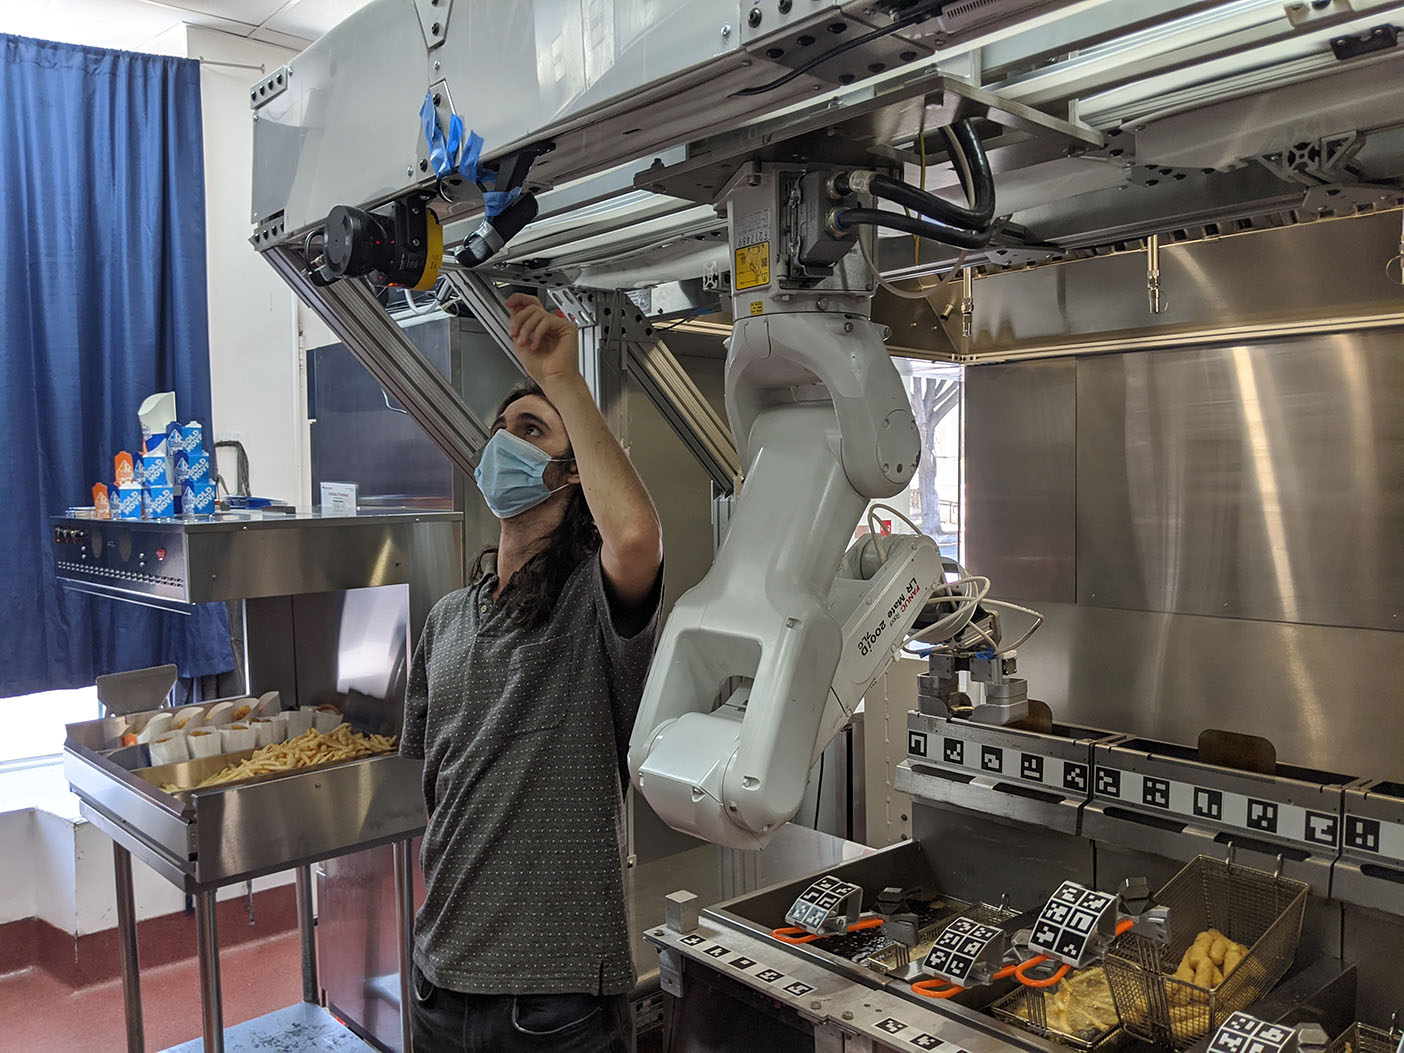 Flippy Robot-on-a-Rail (ROAR), can cook up to 19 food items, and is mounted on a recessed overhead rail to increase safety for catering staff